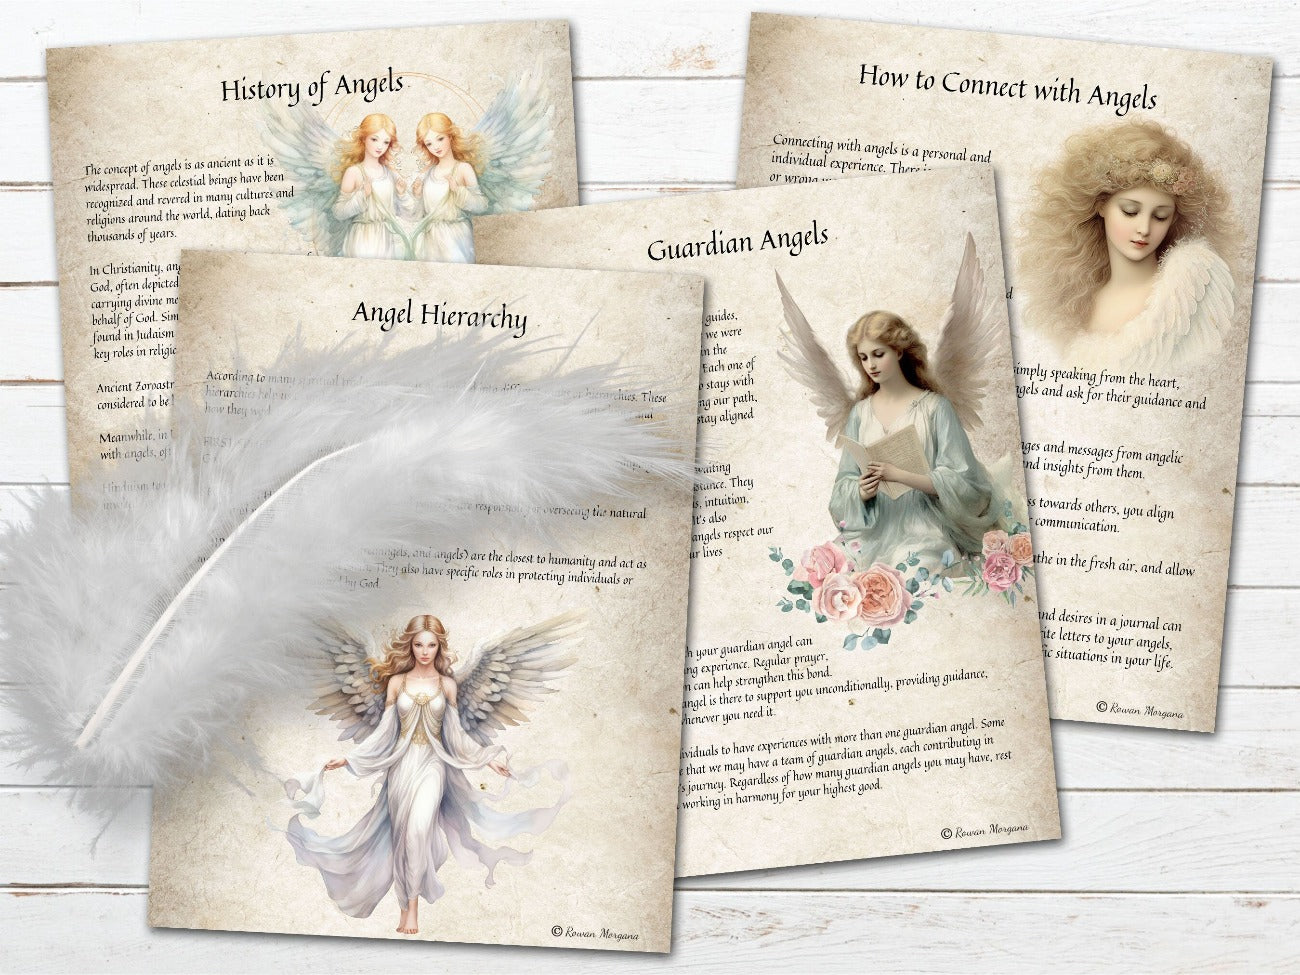 ANGEL GUIDANCEpages, Essential Guide to Divine Angelic Realm, History of Angels, Angel Hierarchy, Guardian Angels, How to Connect with Angels - Morgana Magick Spell